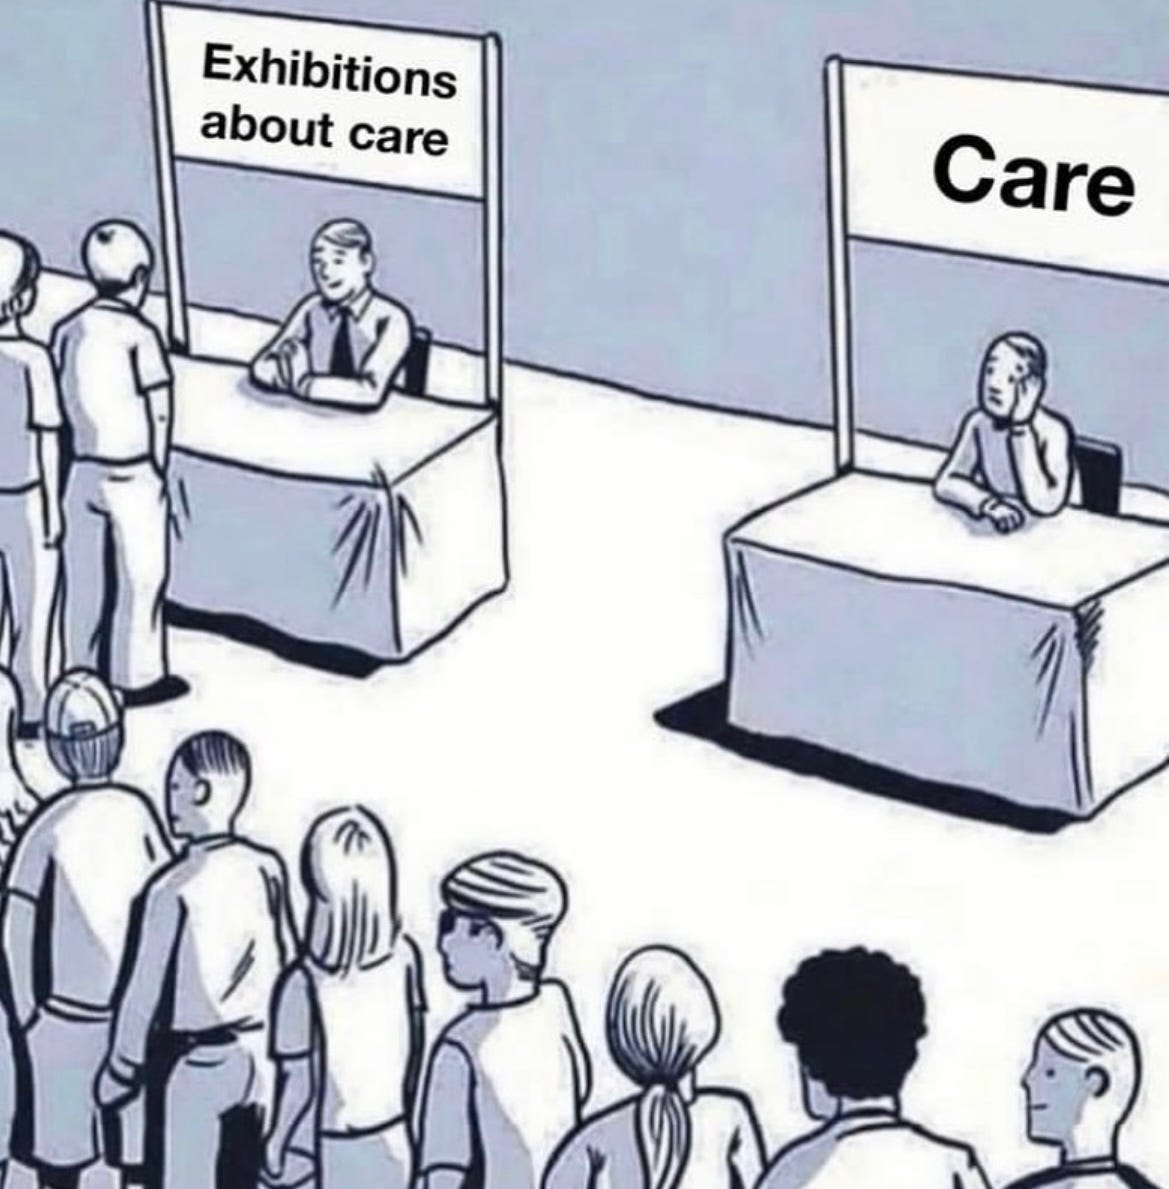 cartoon of 2 stands: left stand has "exhibitions about care" written across the top with a long queue of people. stand on right has "care" written across the top and nobody is queueing for this line.